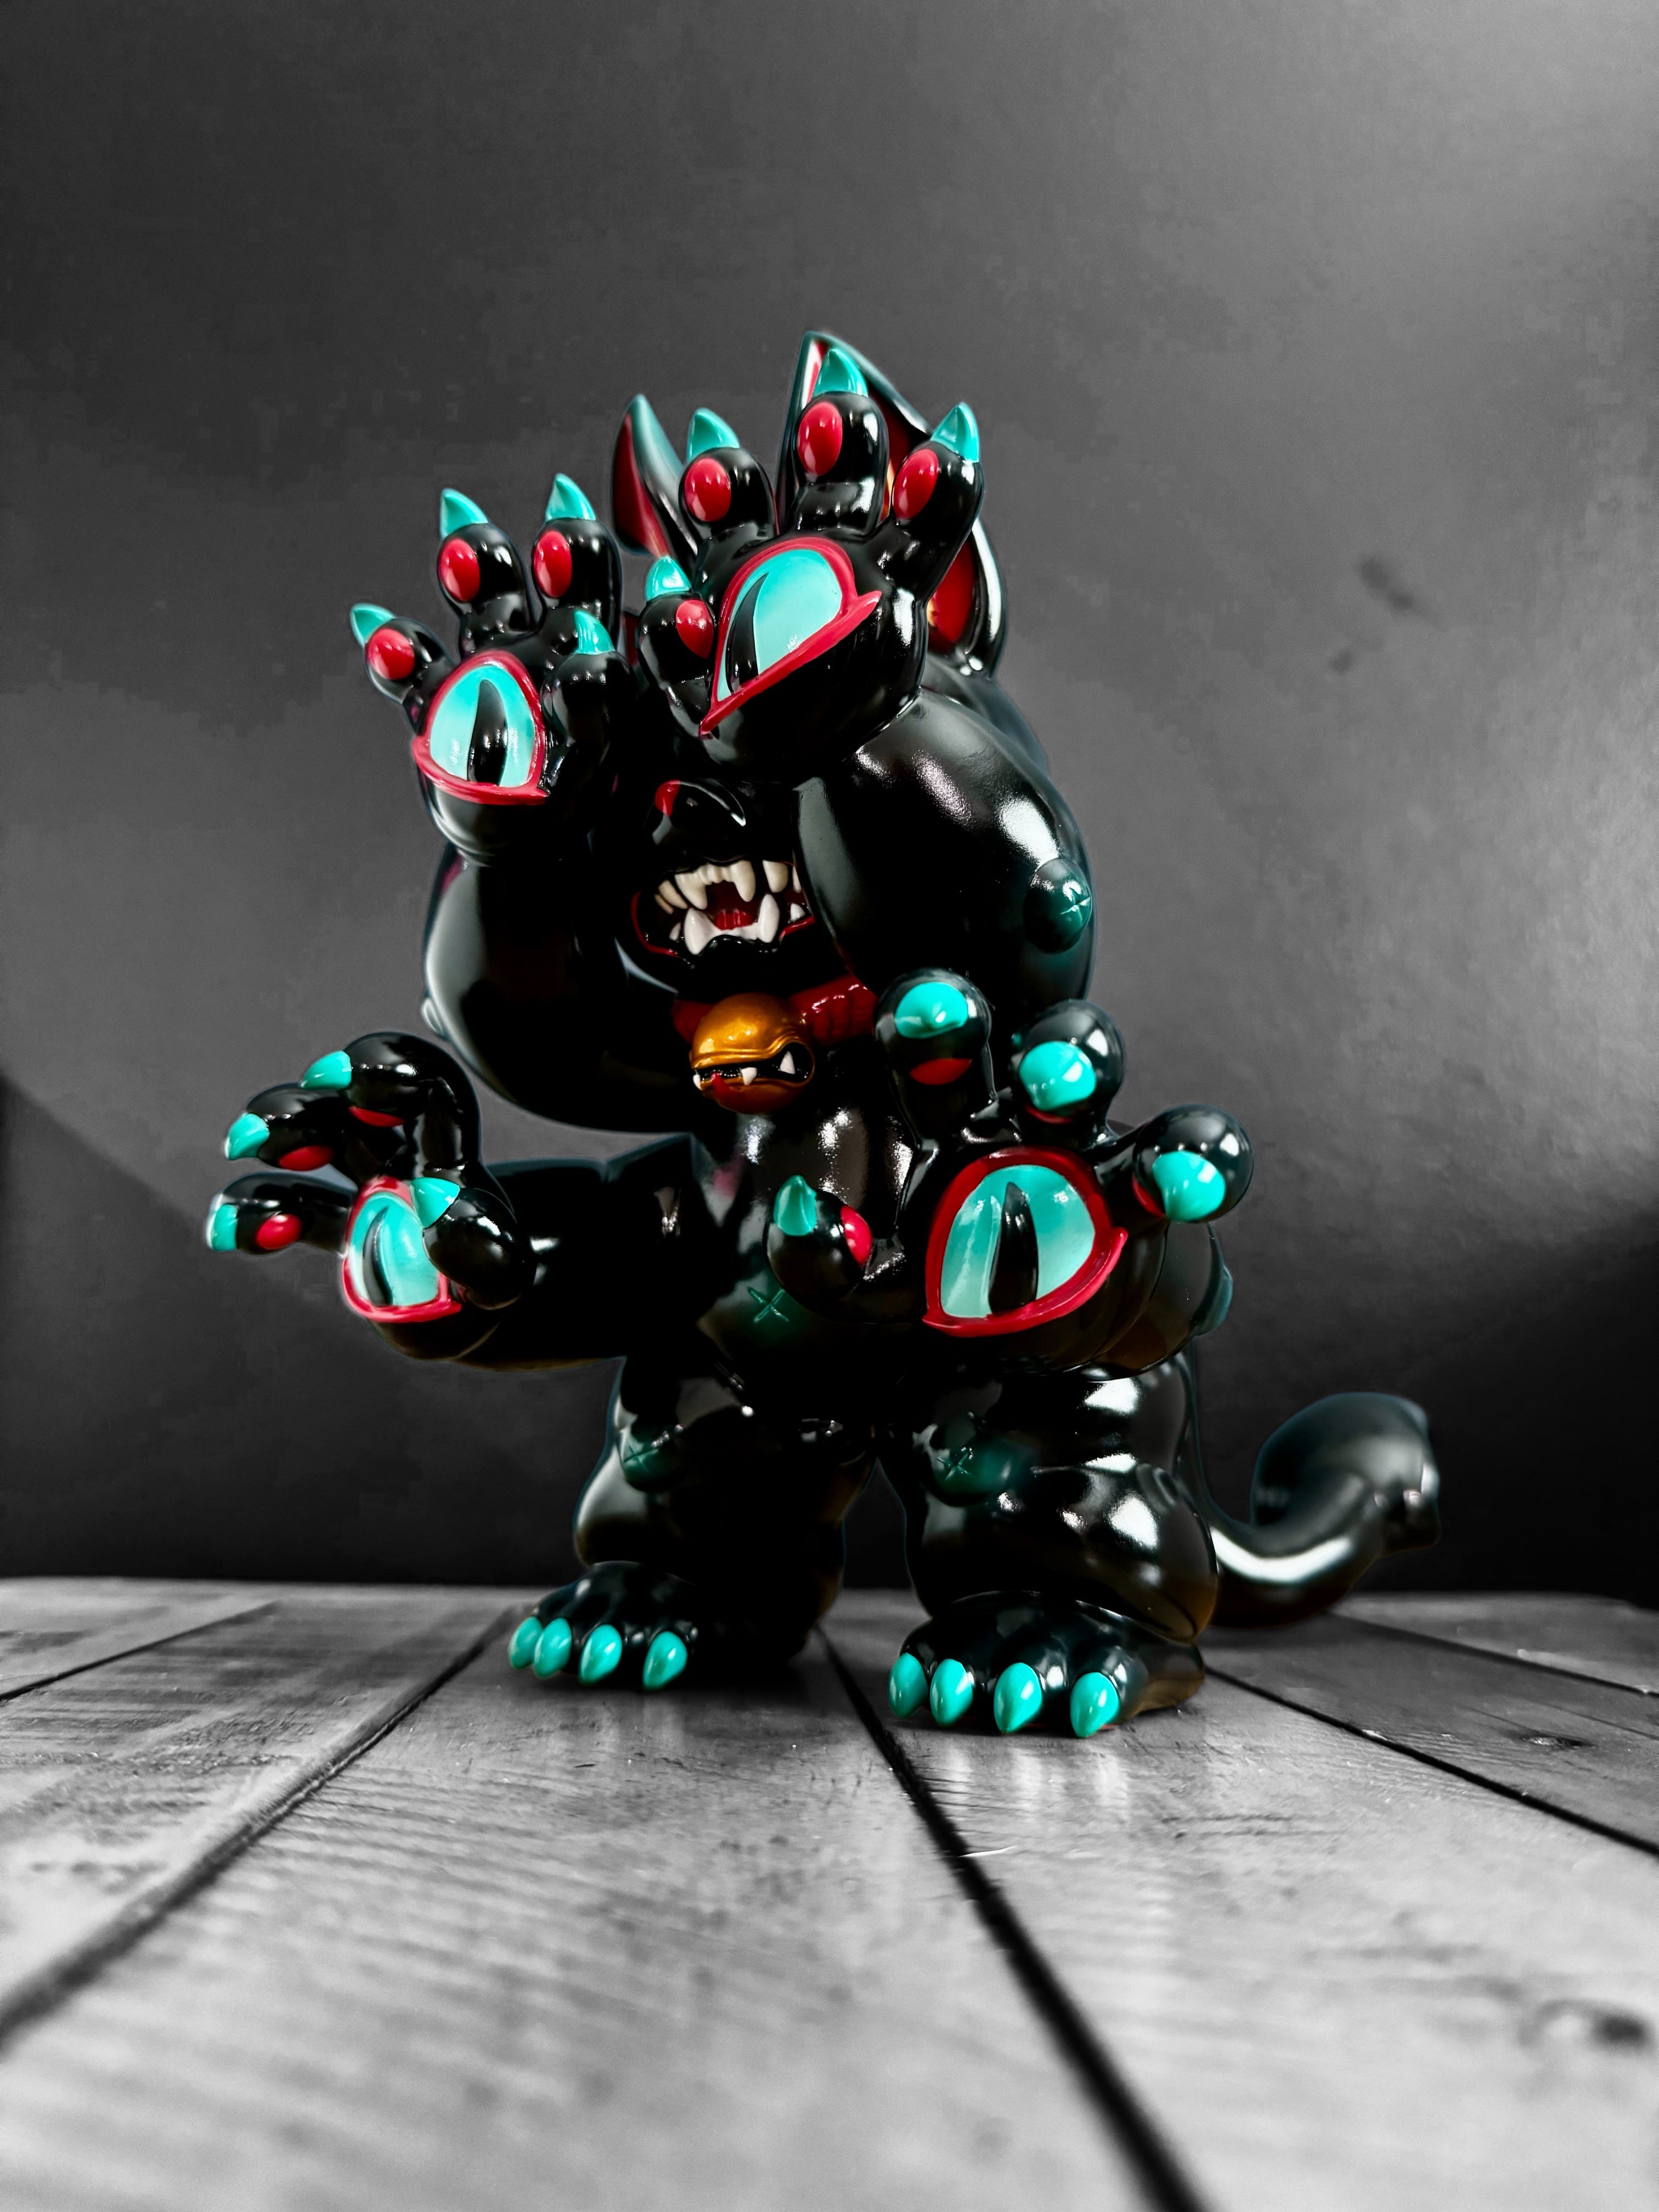 Limited edition DAINIGIRUJIN Black Ver. vinyl toy, 8 tall, 9.5 long. Detailed claws and buttons. From Strangecat Toys, a blind box and art toy store.